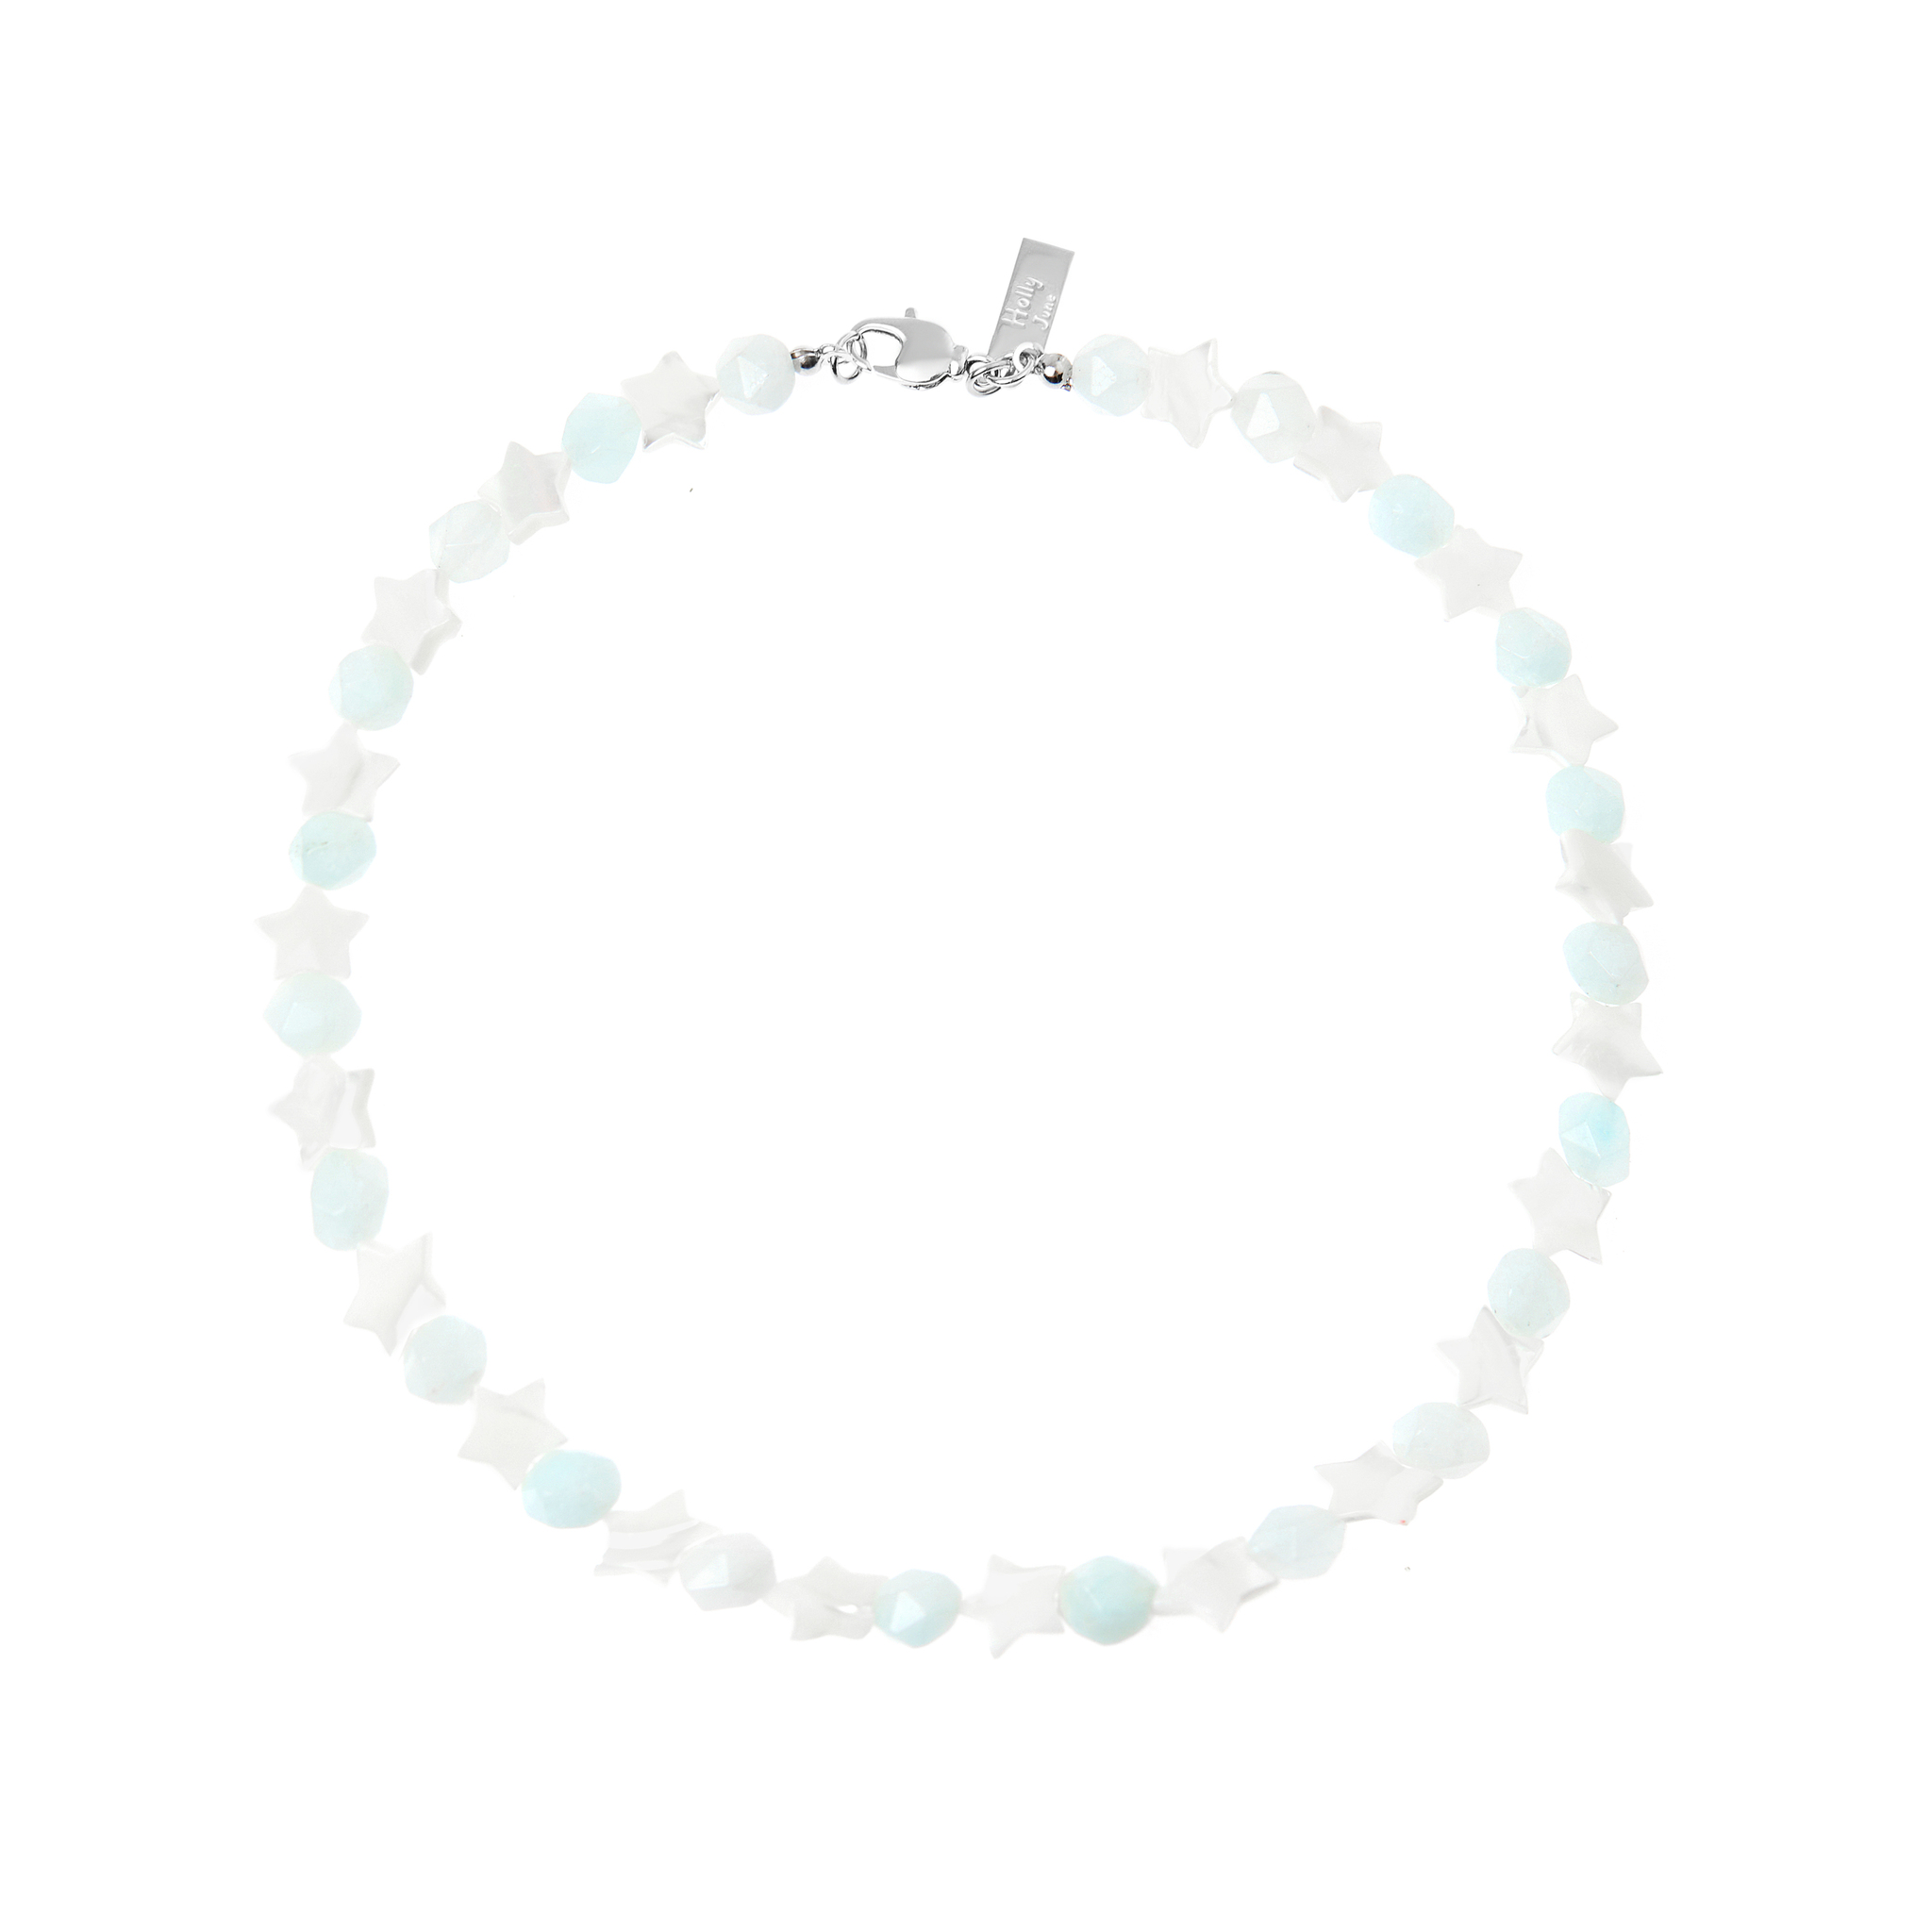 HOLLY JUNE Колье Candy Star Necklace – Blue holly june колье blue crystal pearl necklace